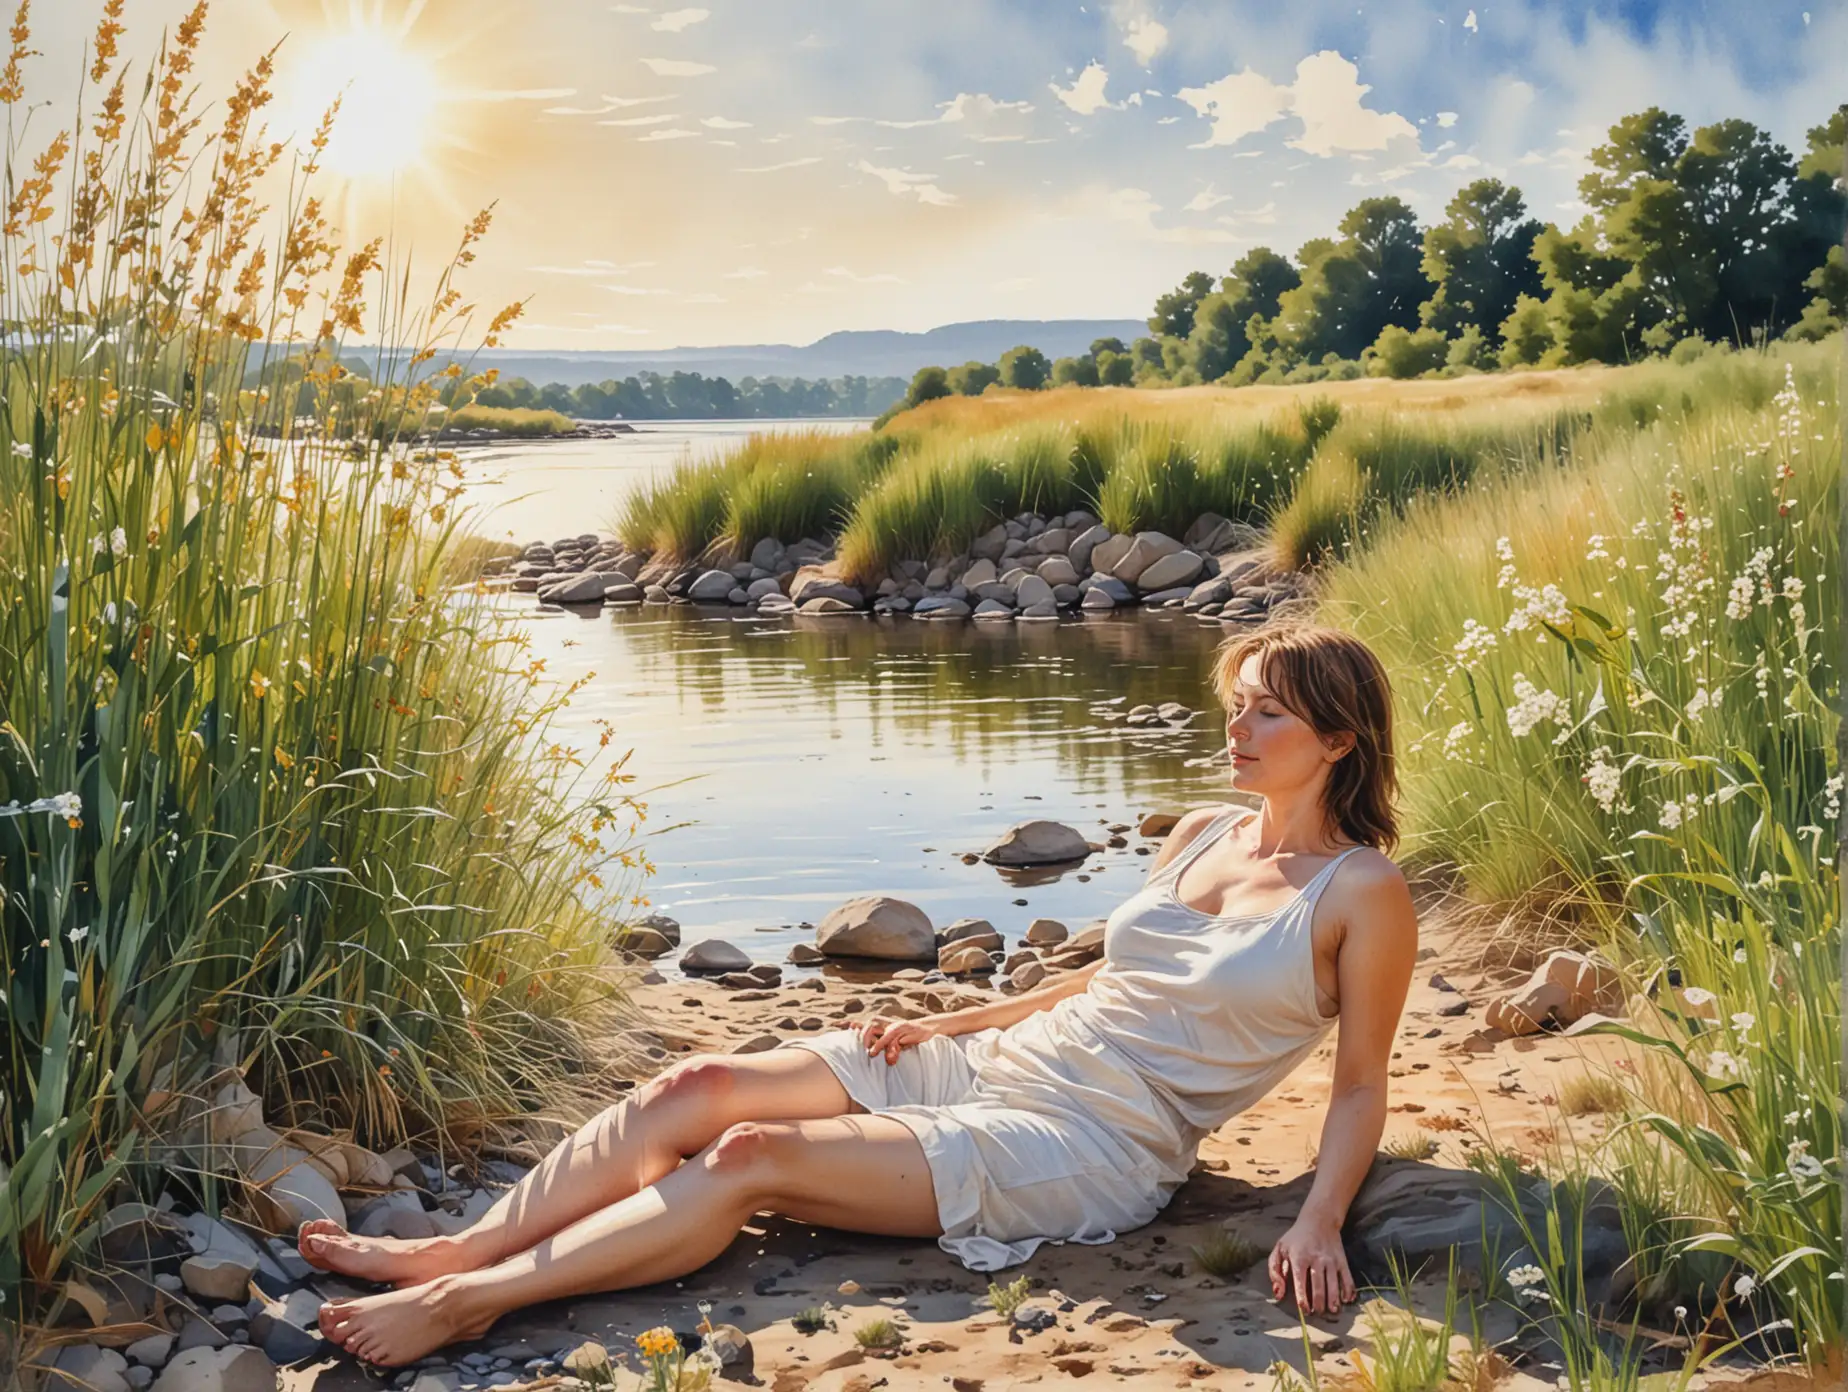 Naturalistic-Watercolor-Painting-Mature-Woman-Resting-by-Riverside-with-Friend